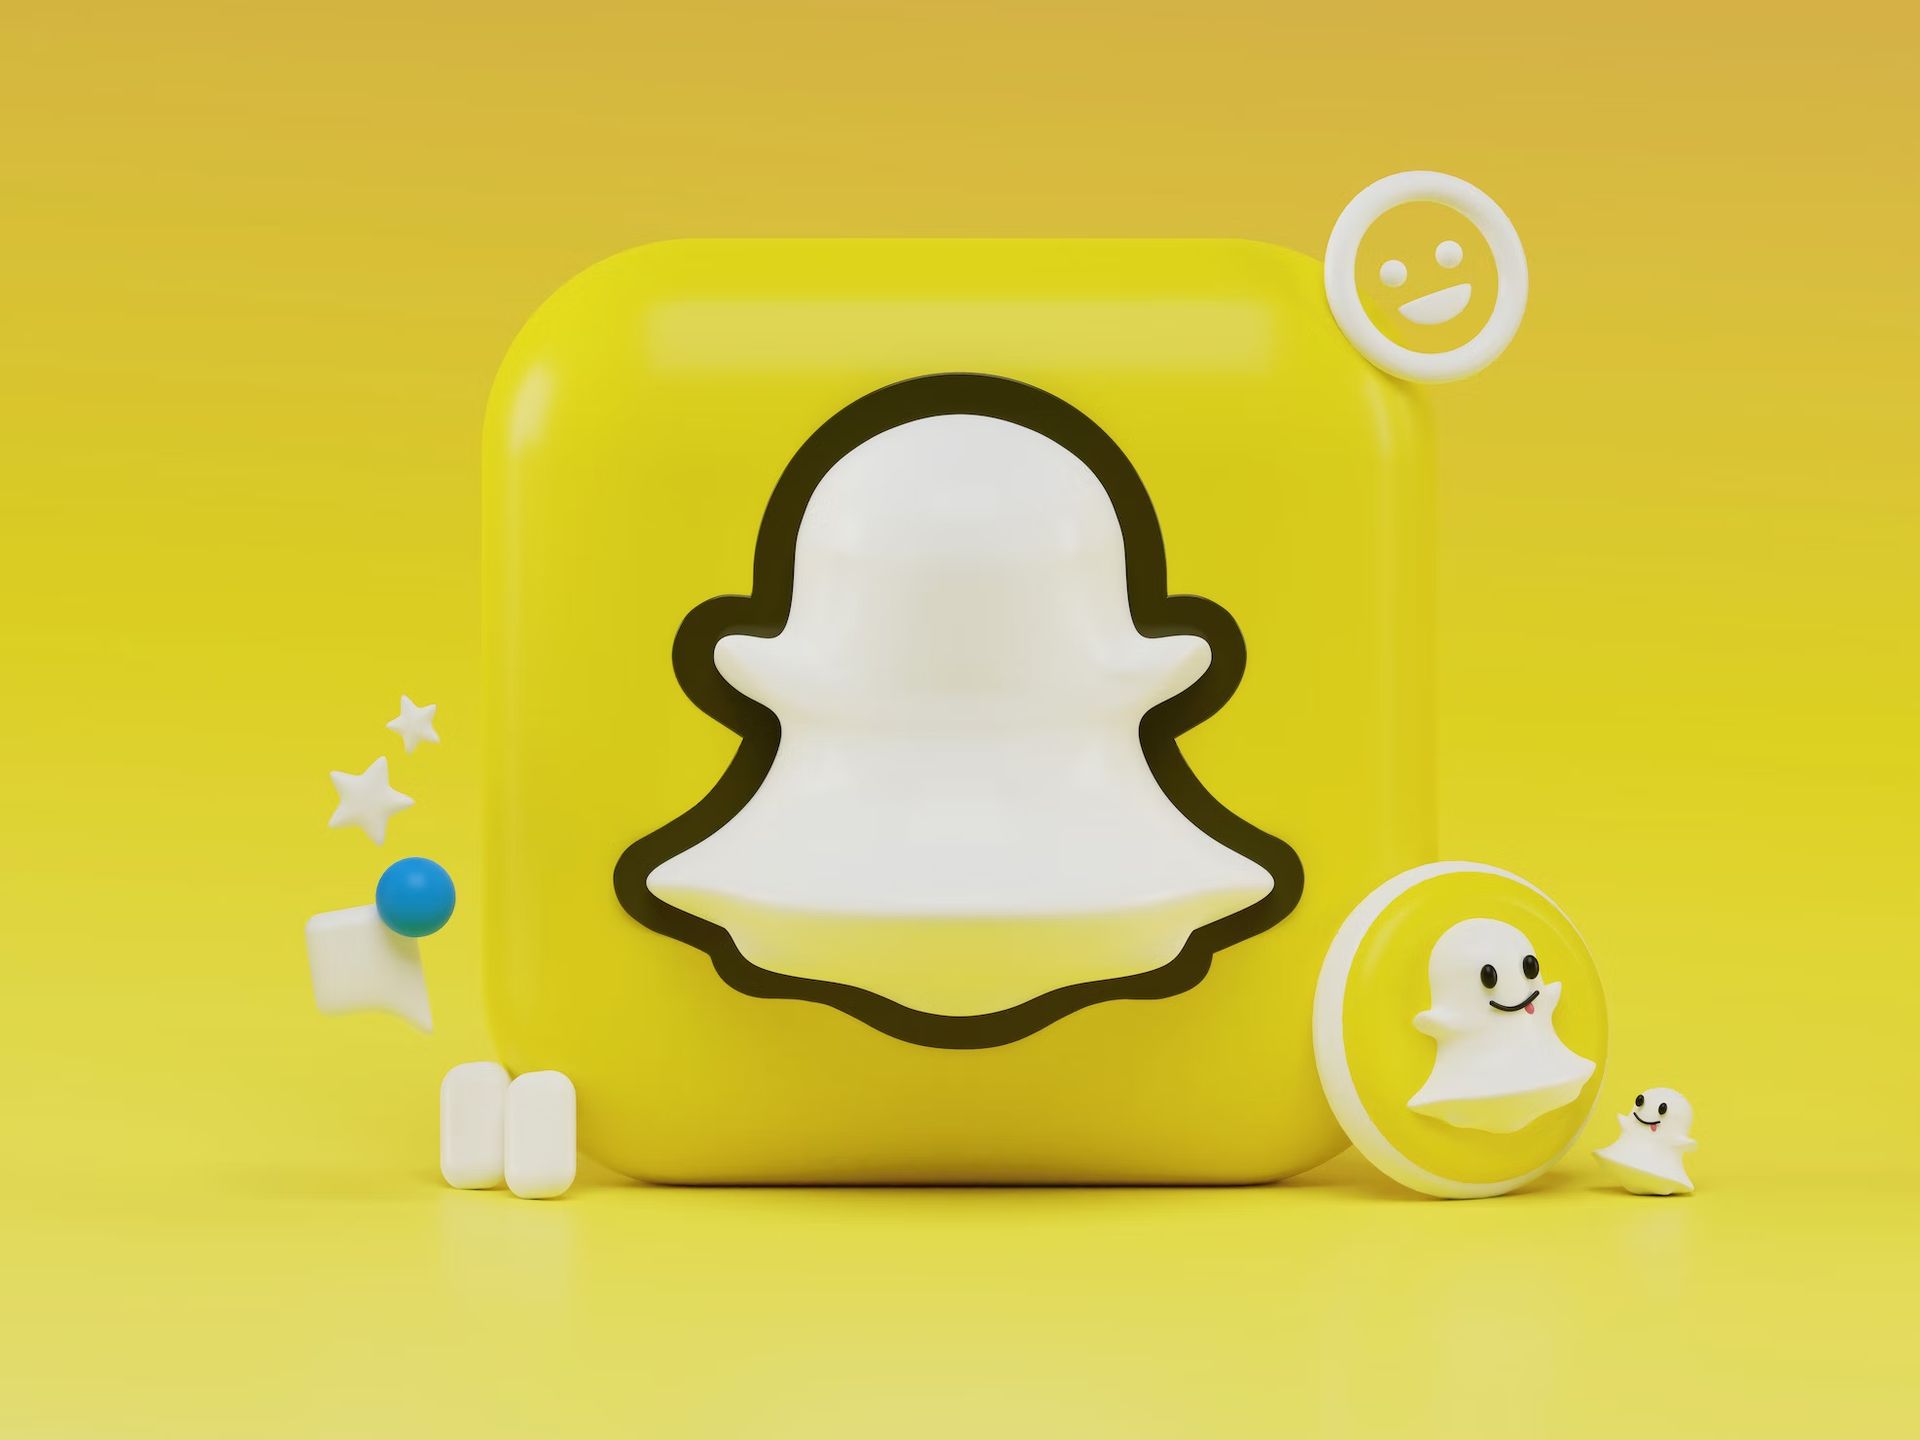 How does snap score work on Snapchat?